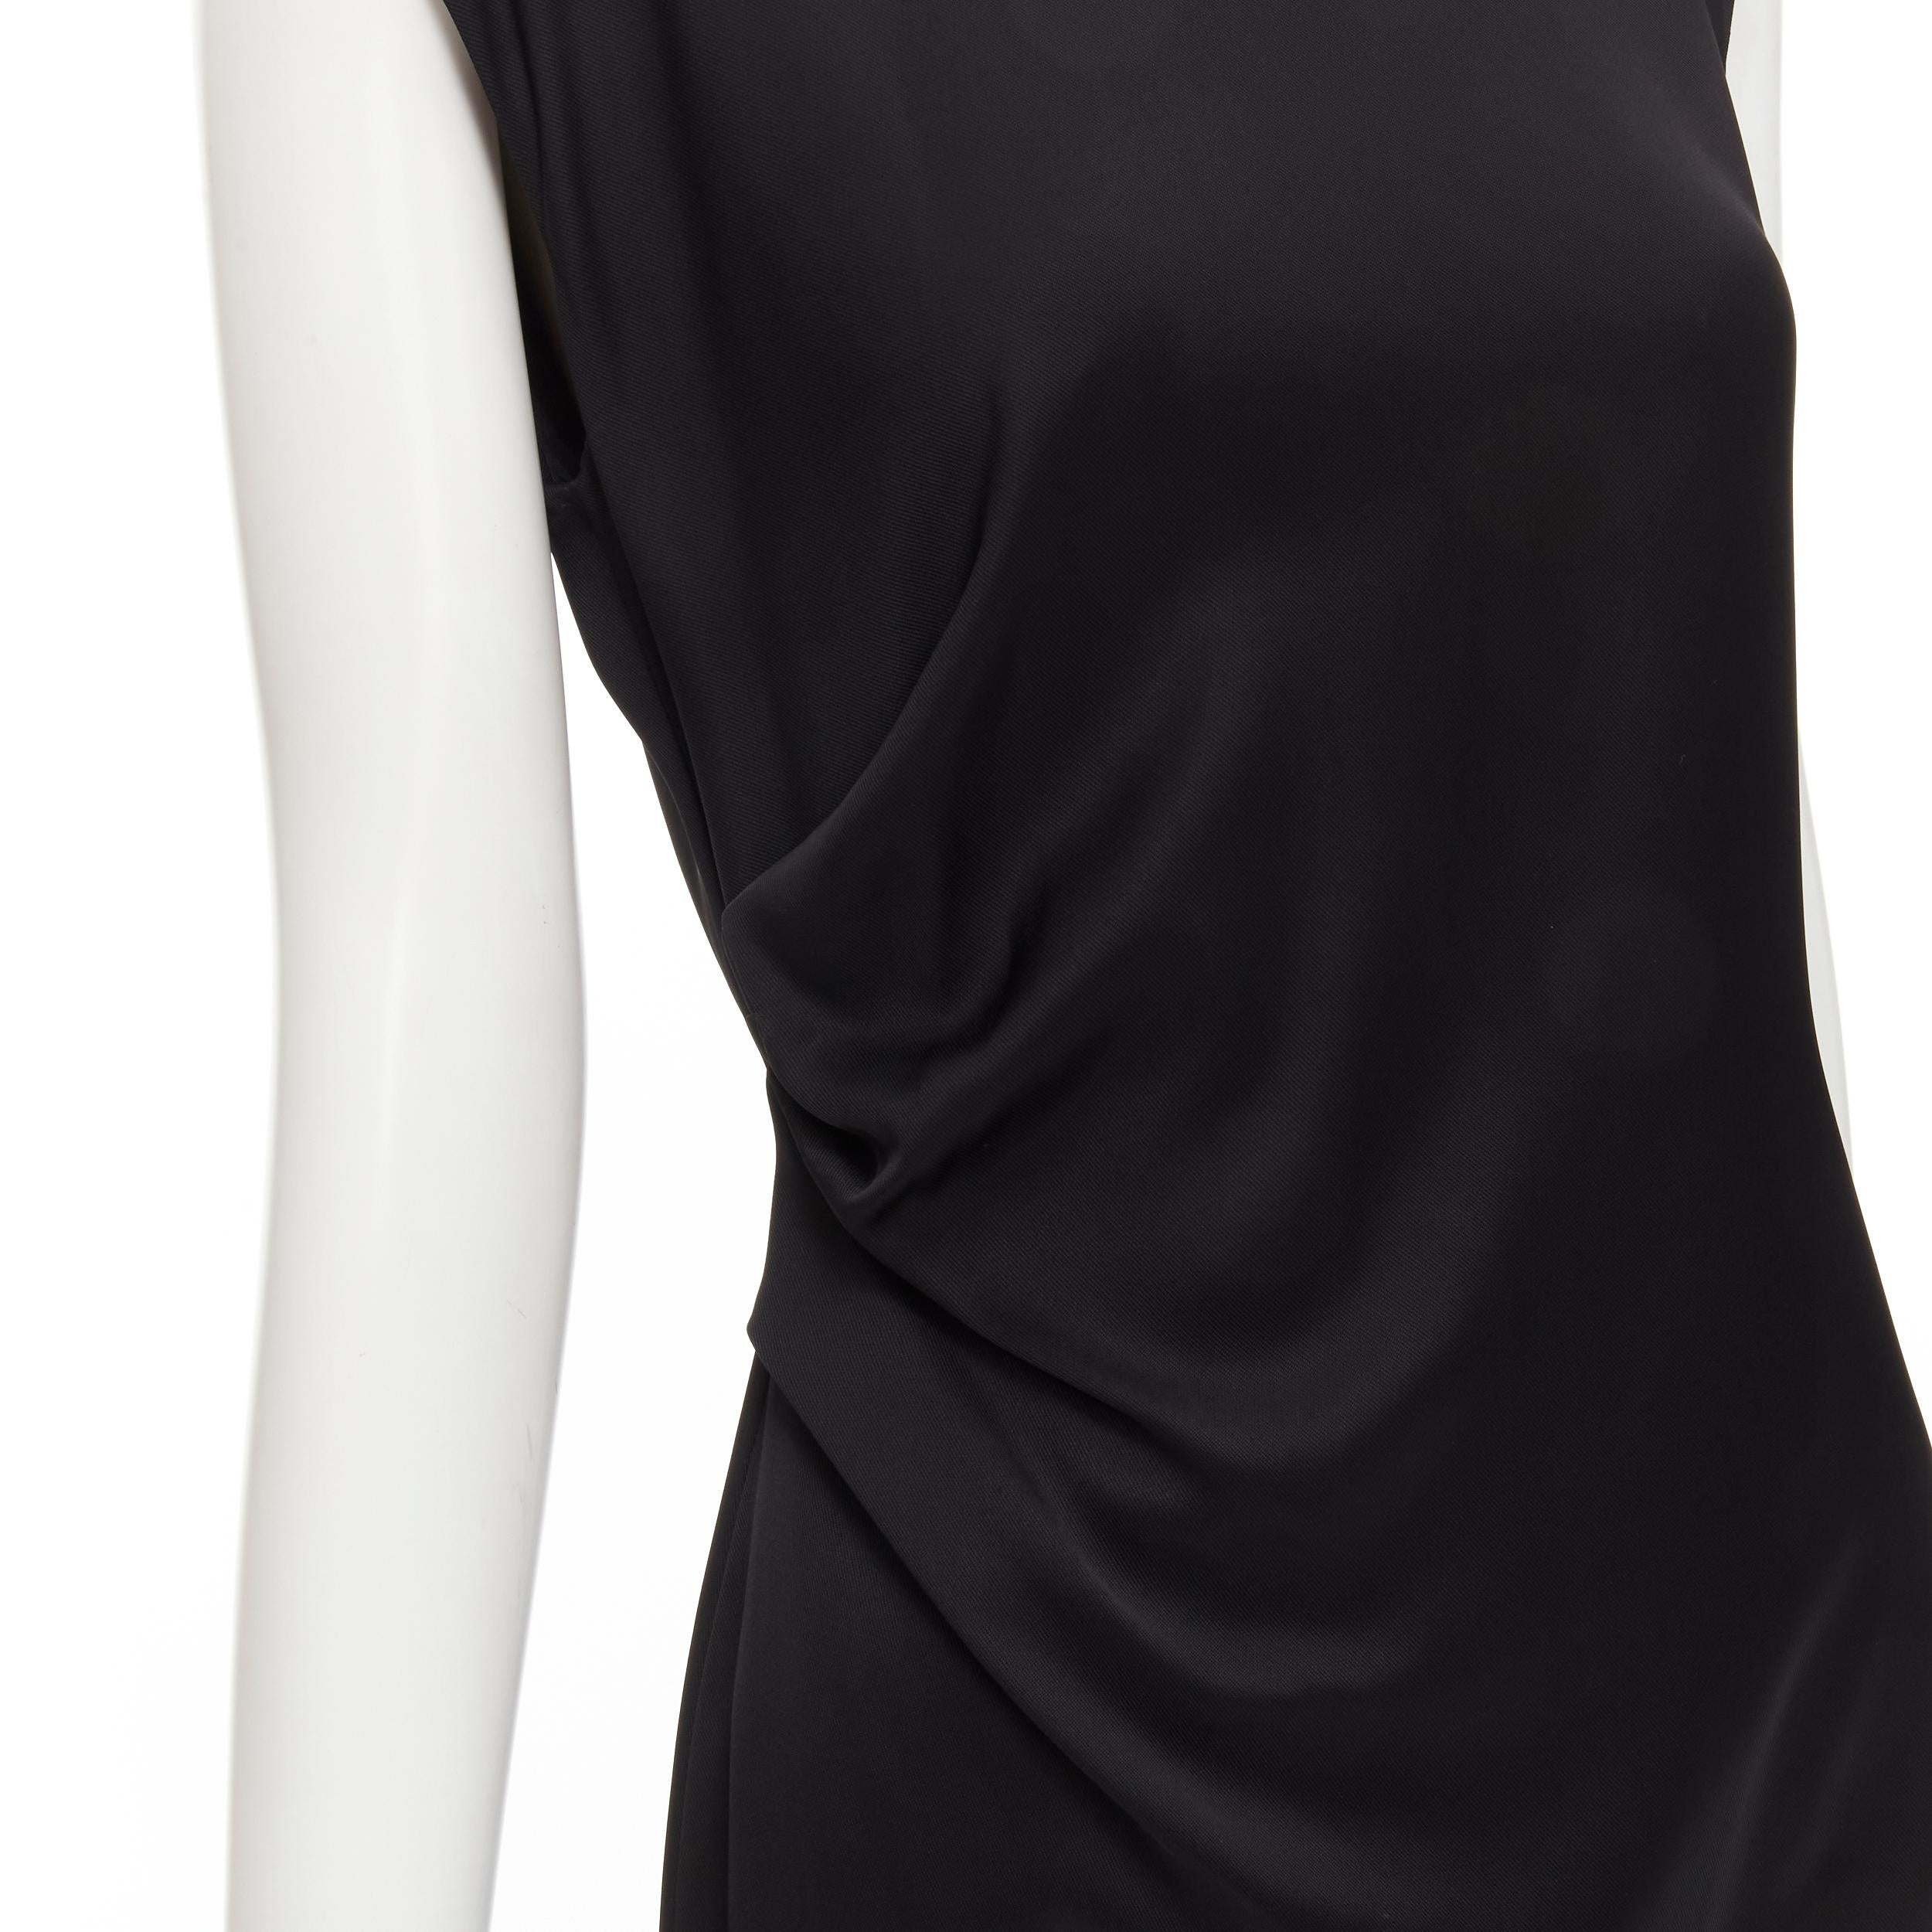 JIL SANDER black viscose gathered draped side seam minimalist dress FR34 XS 
Reference: LNKO/A01961 
Brand: Jil Sander 
Material: Viscose 
Color: Black 
Pattern: Solid 
Closure: Zip 
Extra Detail: Side draped gathering. 
Made in: Italy 

CONDITION: